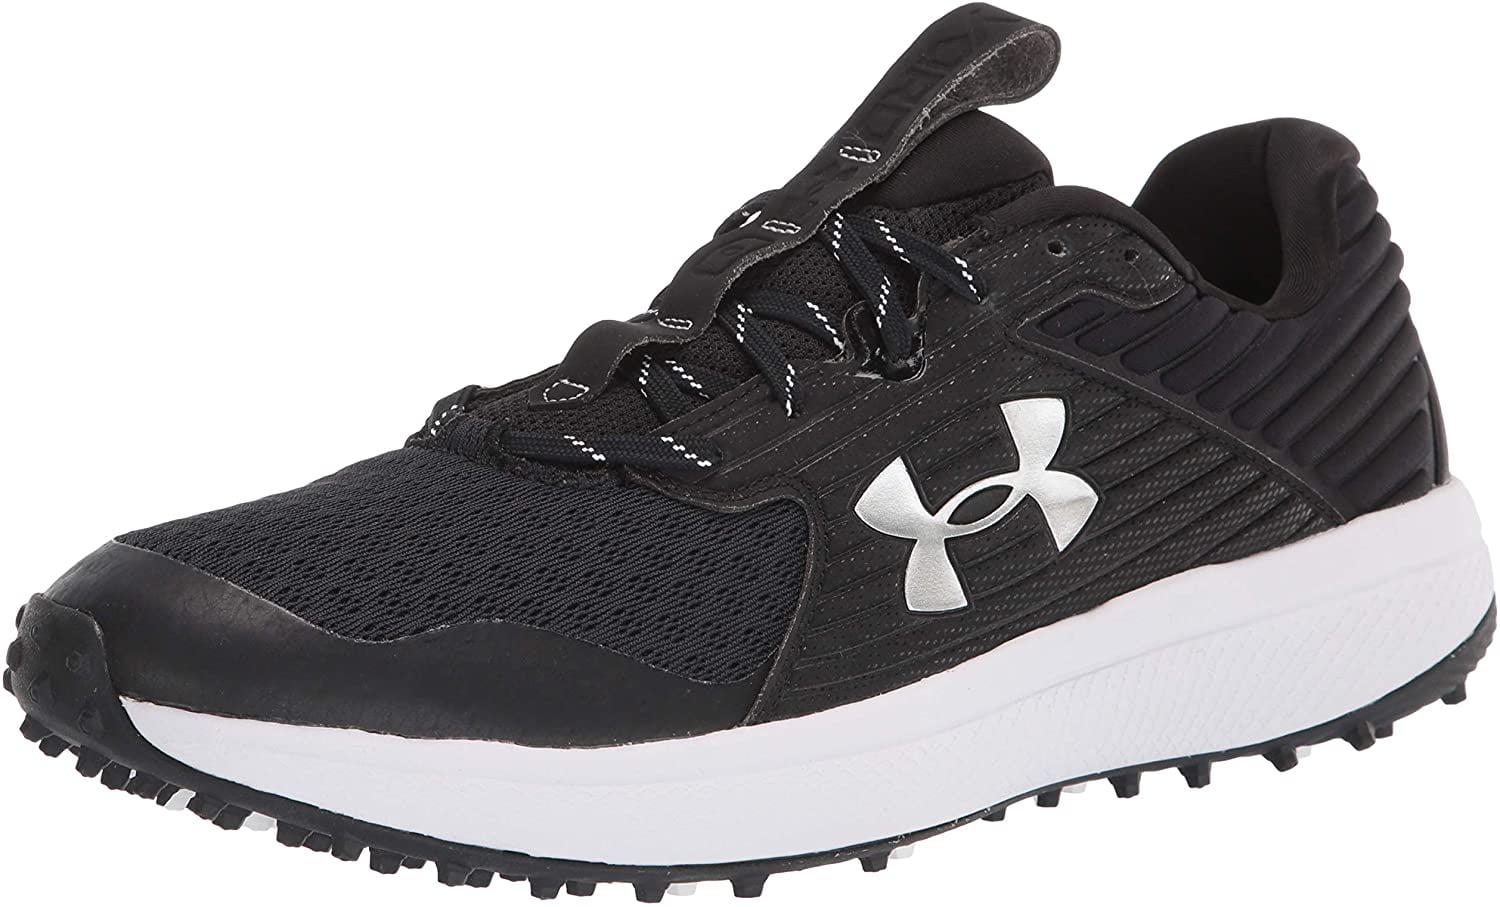 Under Armour Mid Turf Shoes | tunersread.com